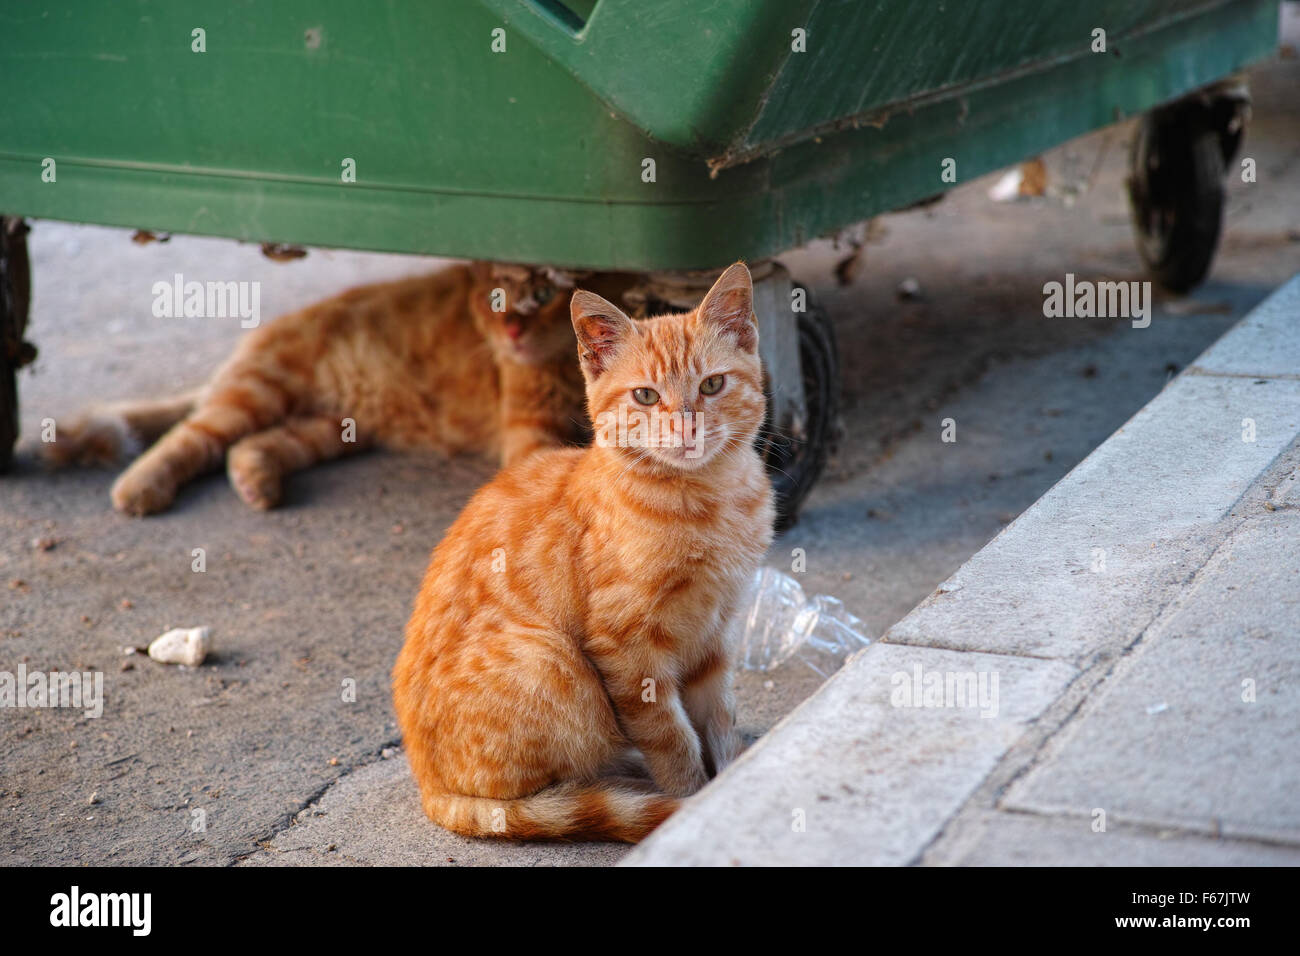 Stray cats or street cats near garbage container. One of them under the garbage container and the other one looks at the camera. Stock Photo